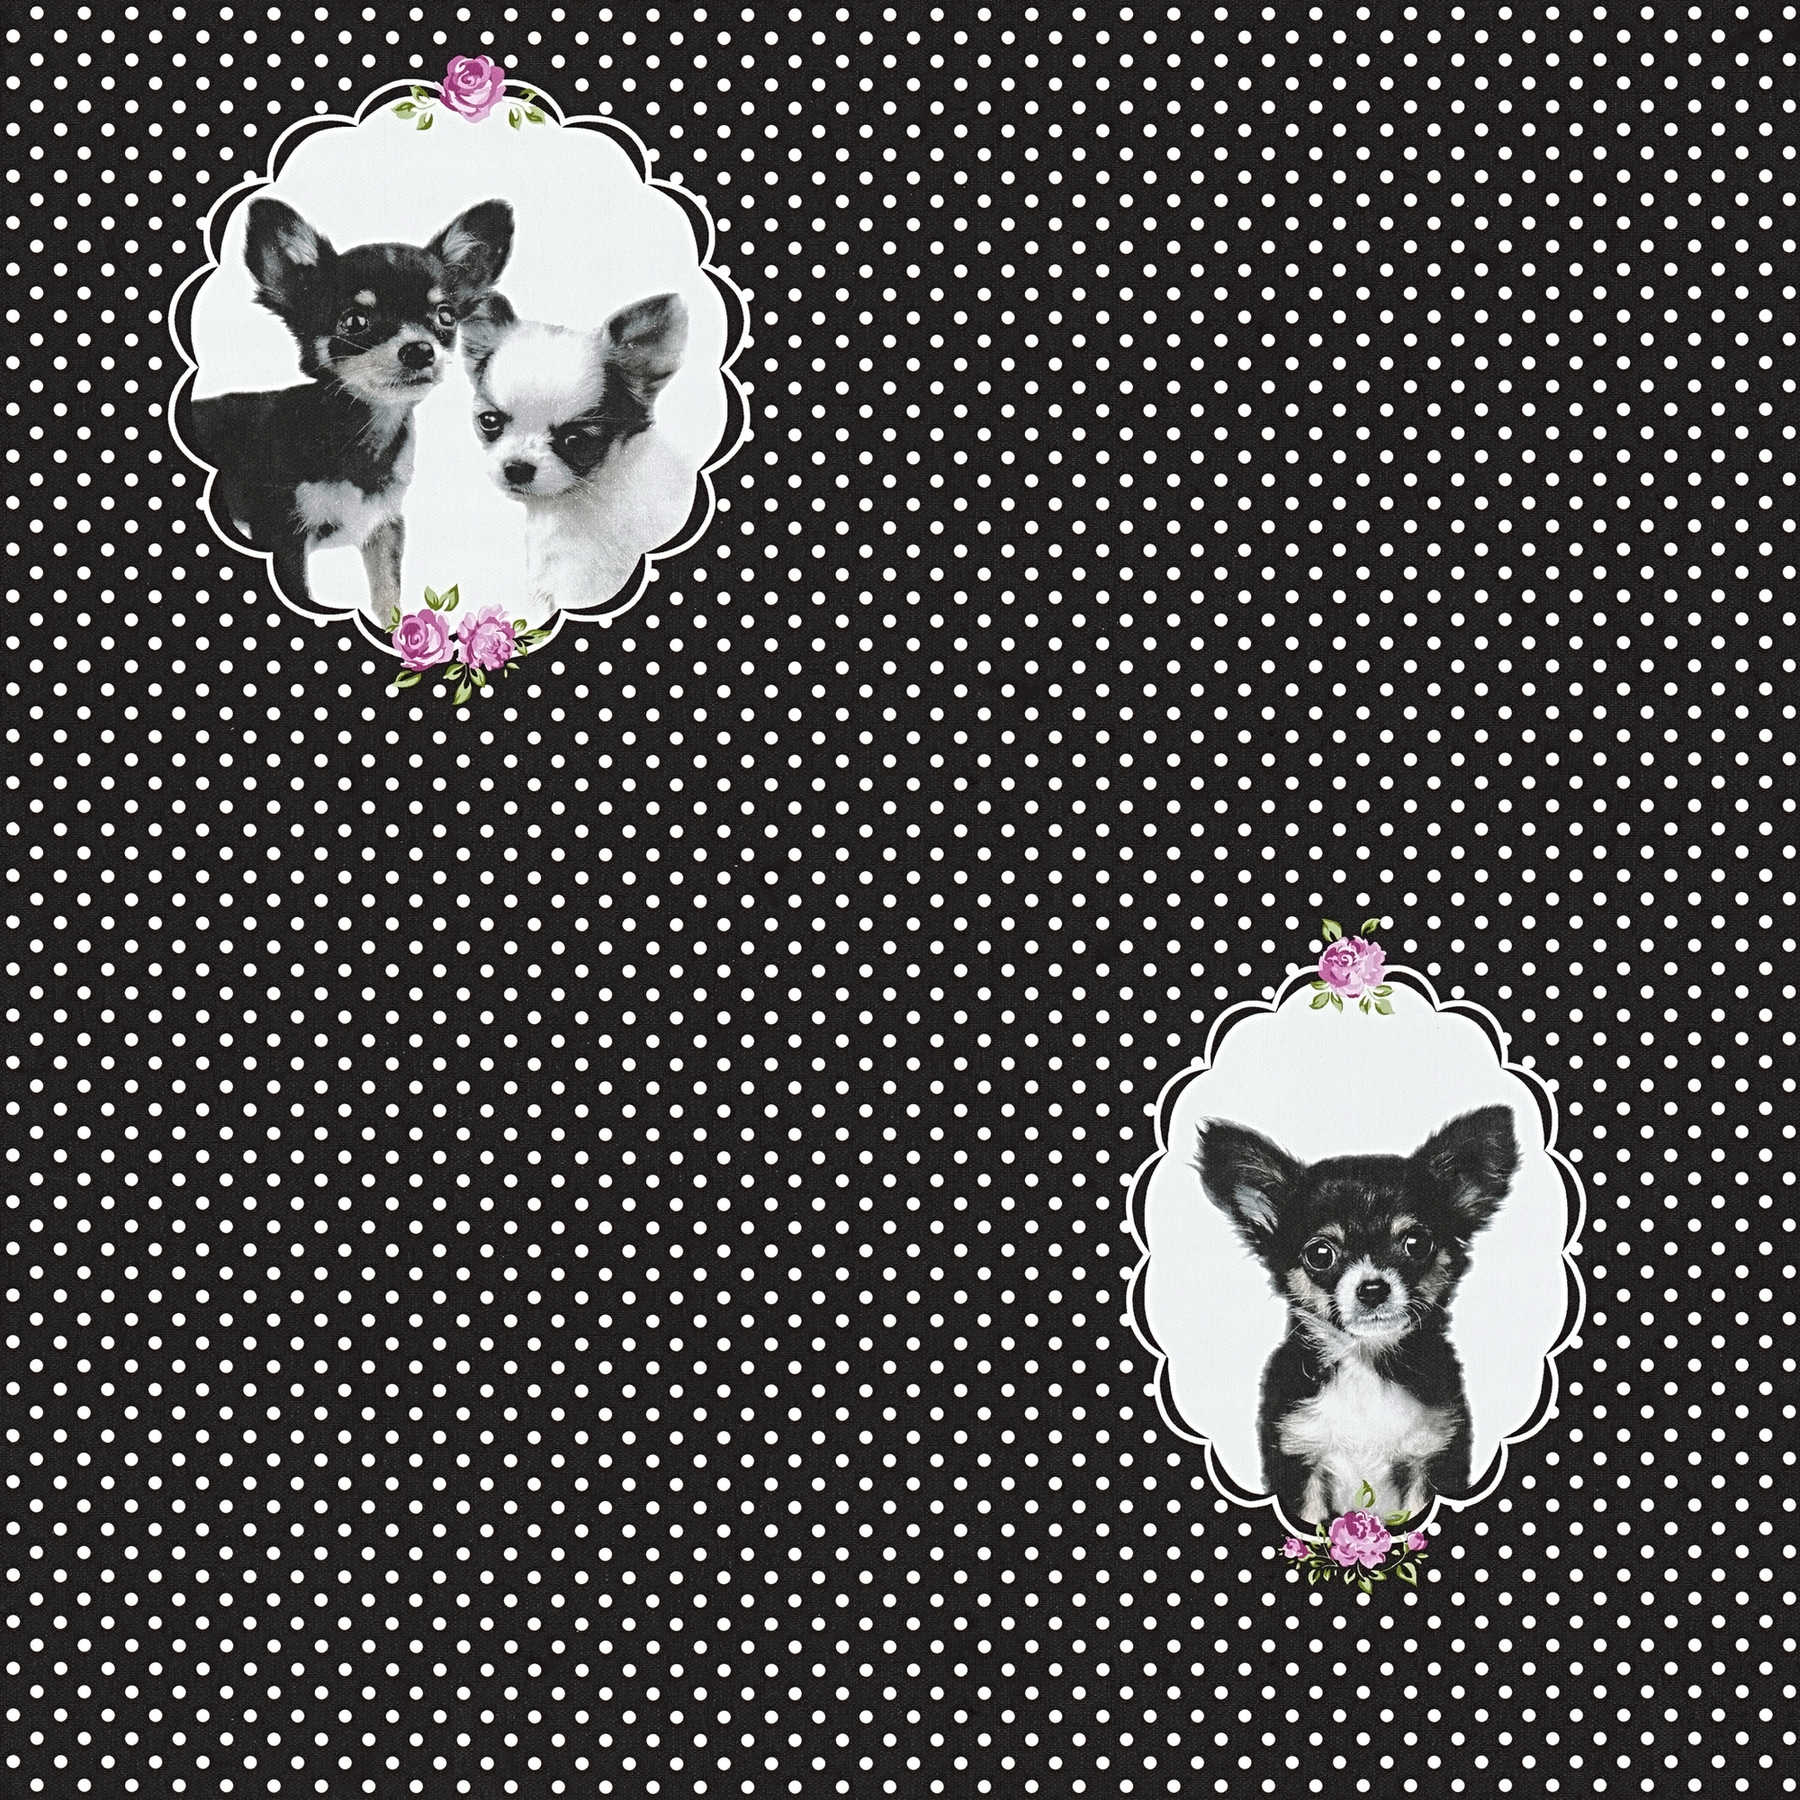 Wallpaper with dots & puppies for Nursery - Black
